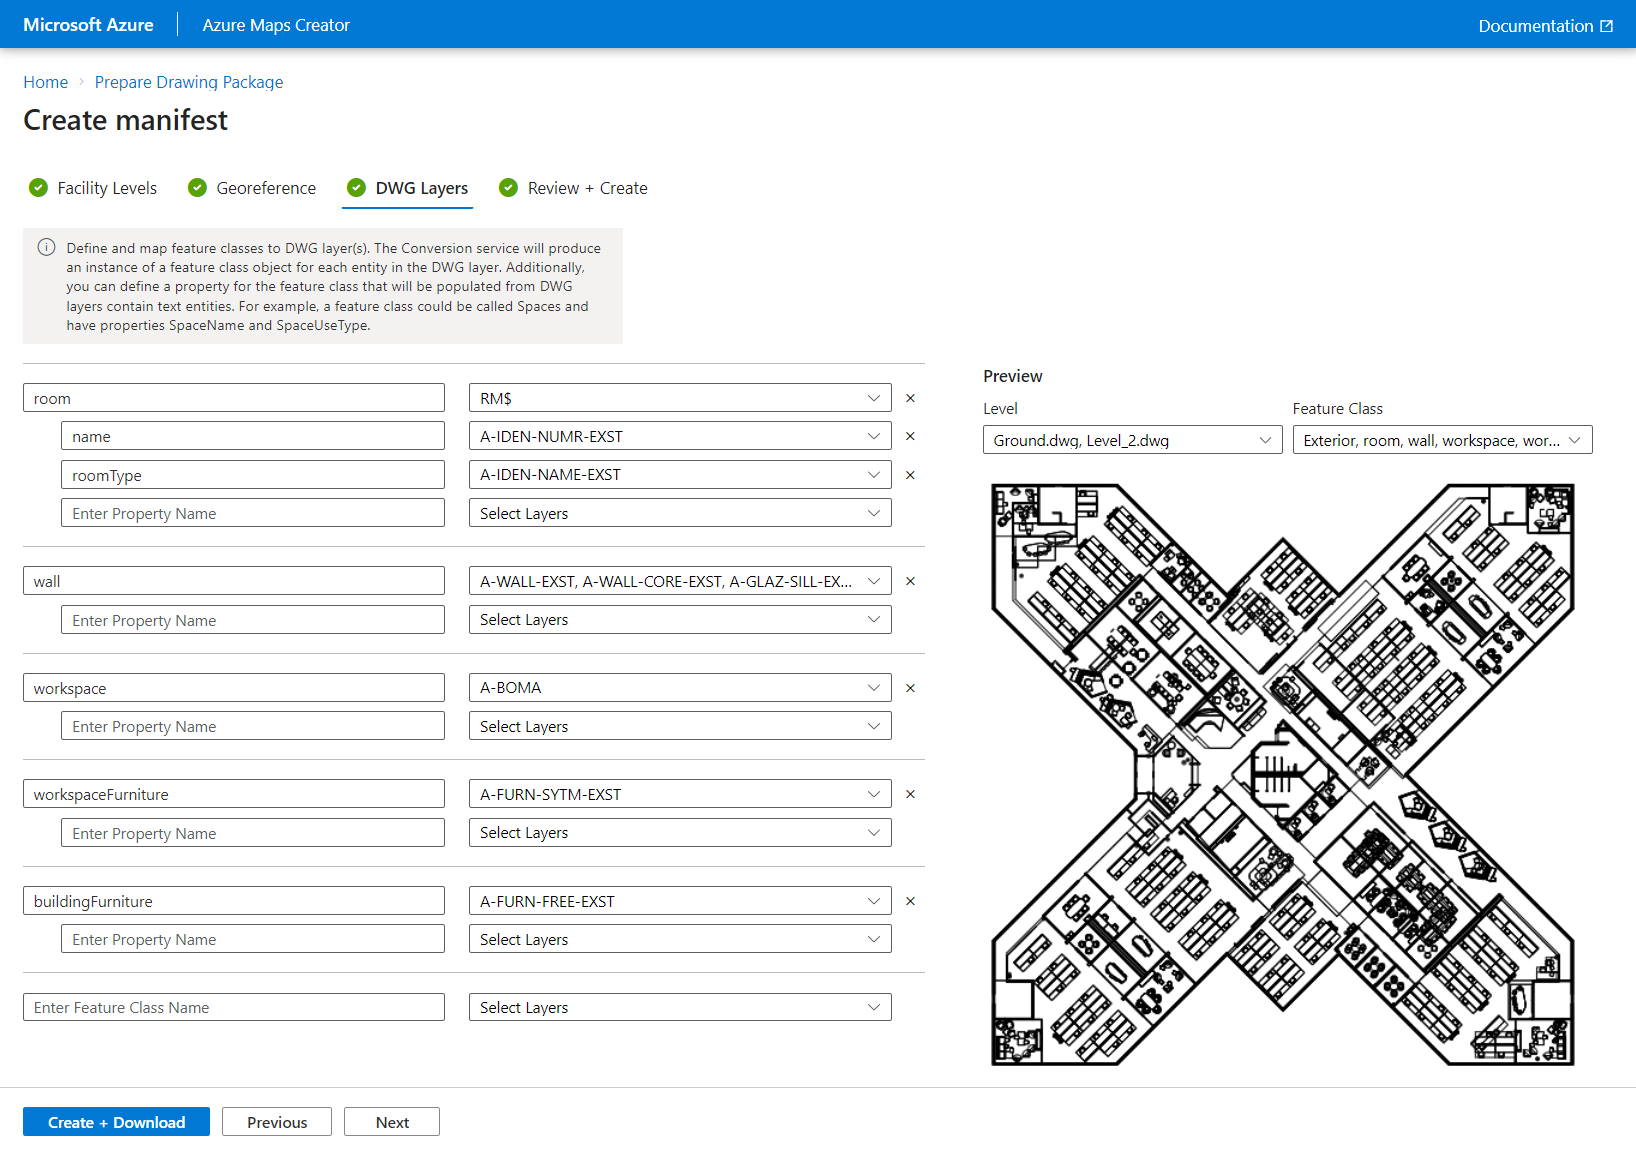 Screenshot showing the 'create a new manifest' screen of the onboarding tool.